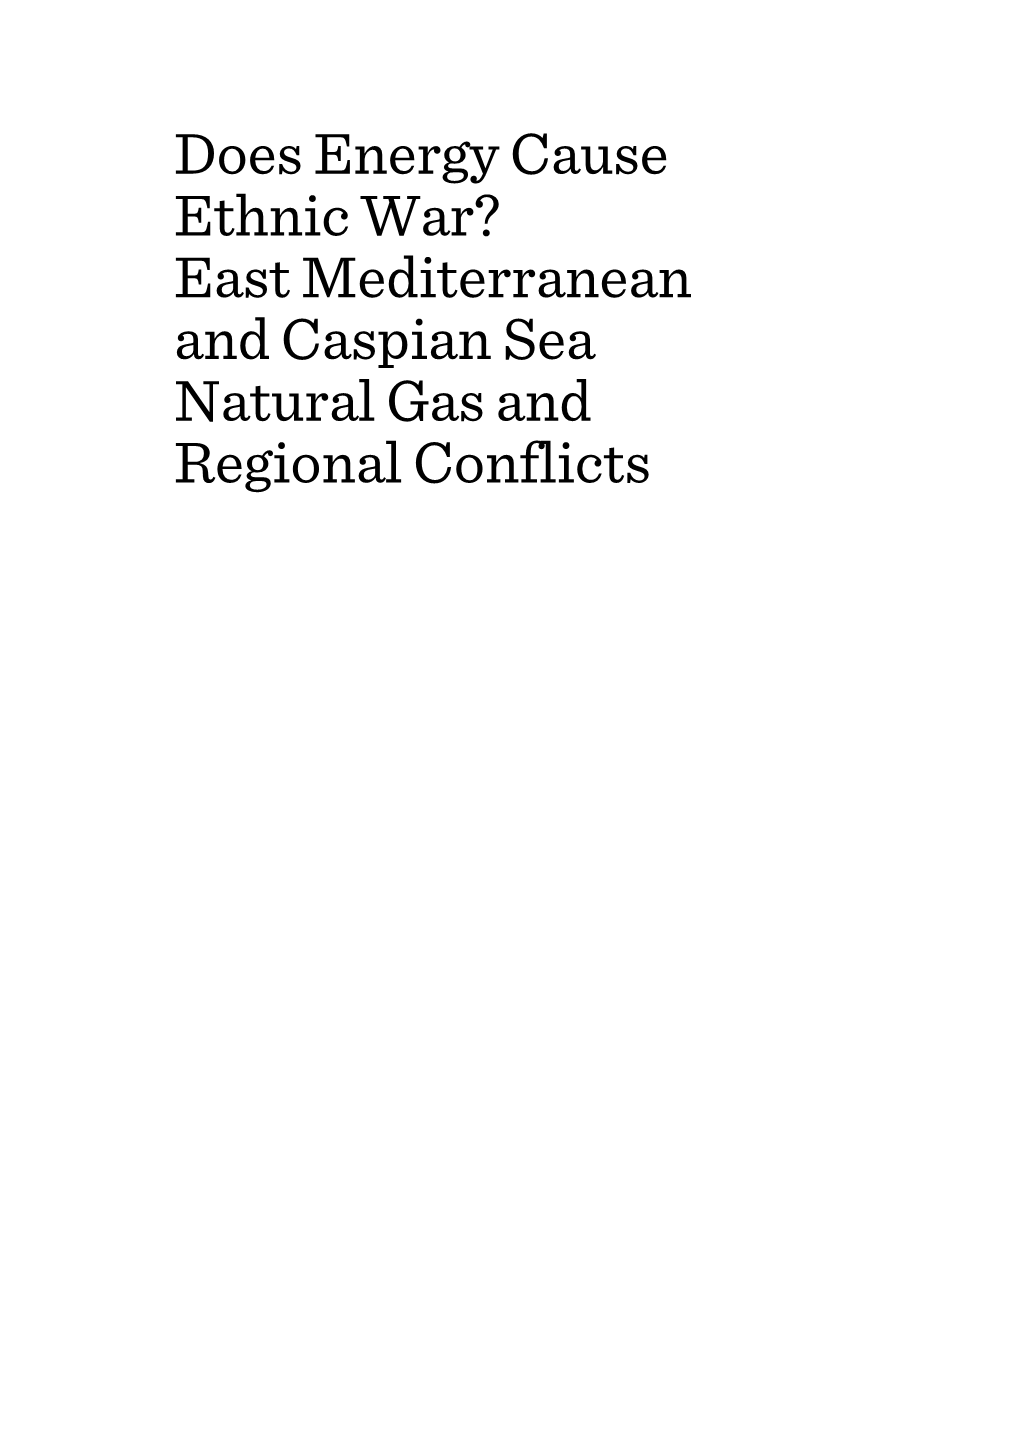 East Mediterranean and Caspian Sea Natural Gas and Regional Conflicts